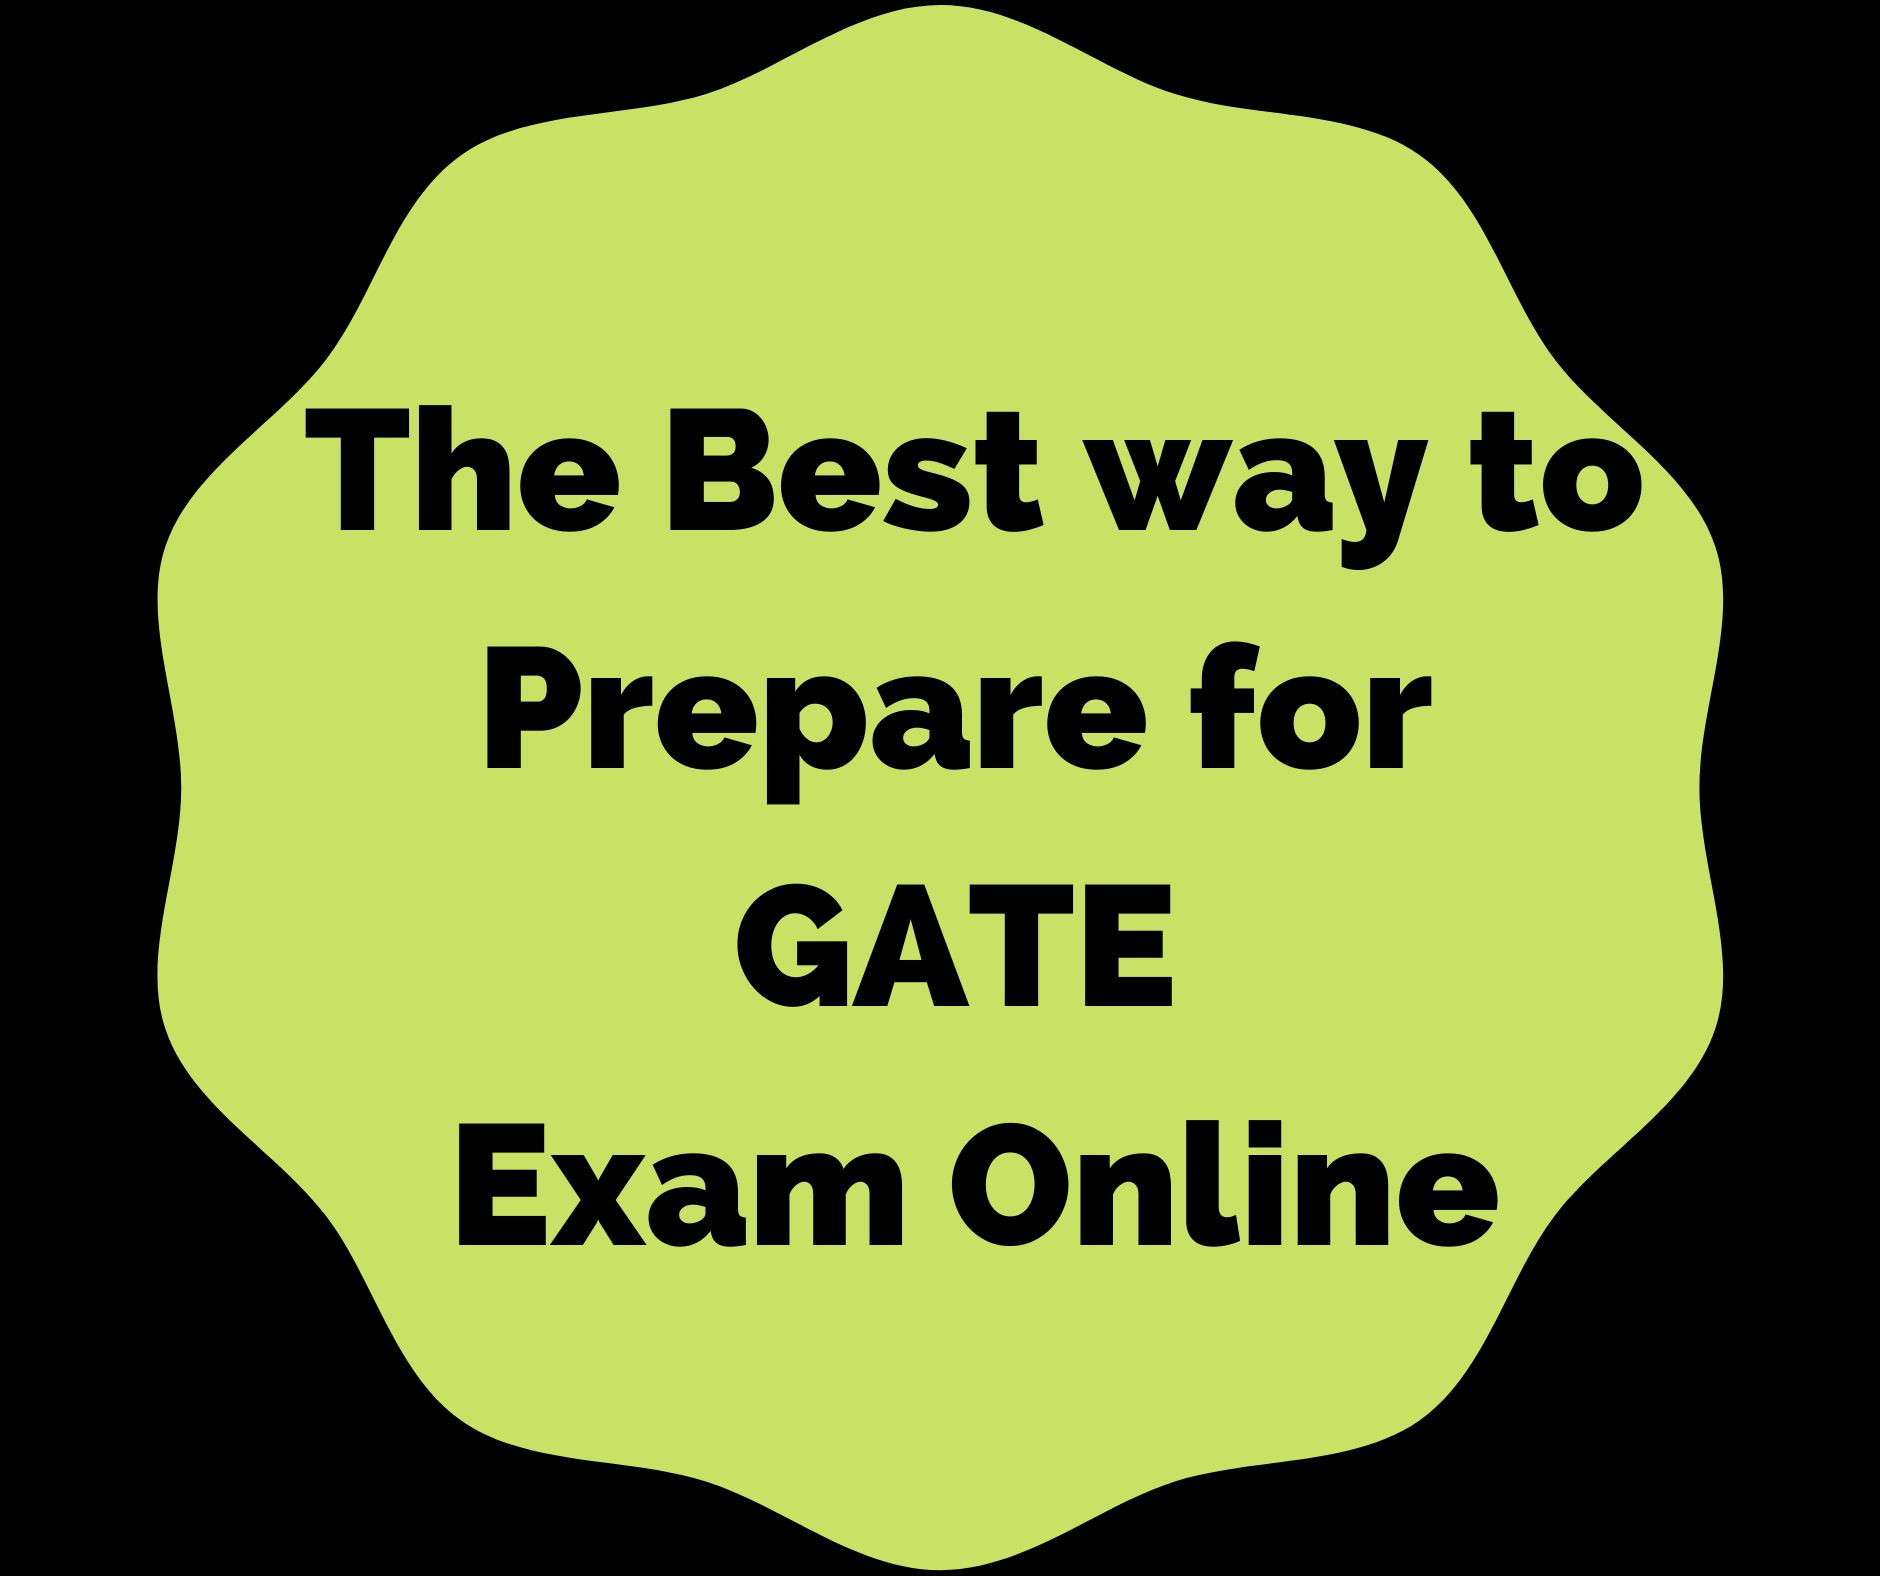 The Best Way to Prepare for GATE Exam Online